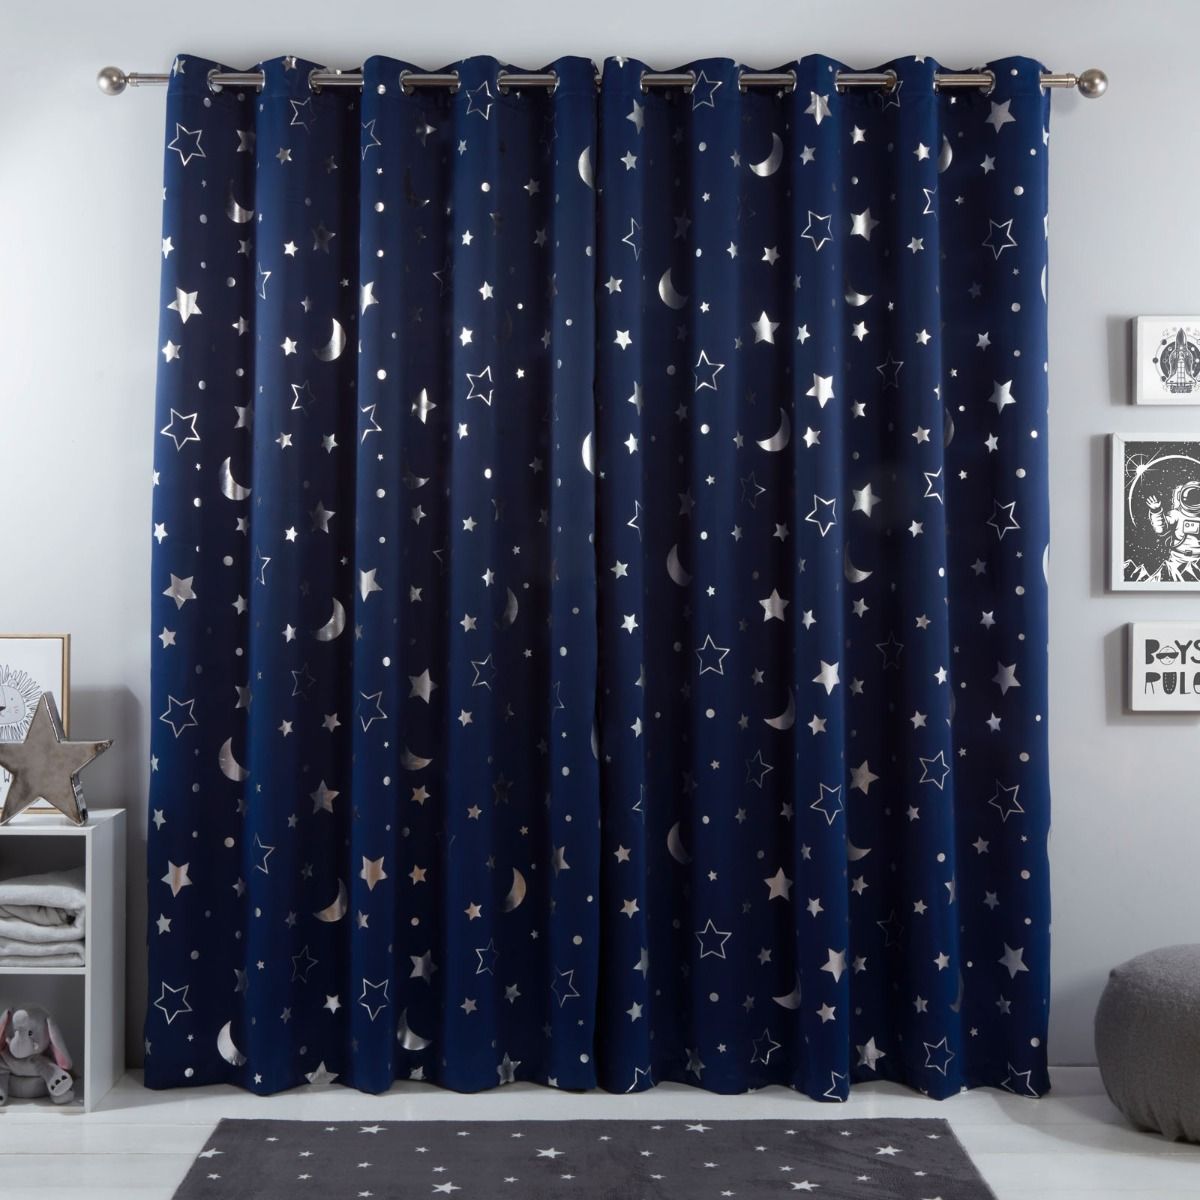 2 Panels BGmet Navy Star Blackout Curtains for Kids Bedroom Eyelet Thermal Insulated Room Darkening Printed Curtains for Living Room W46 X L90 Inch, Dark Blue 